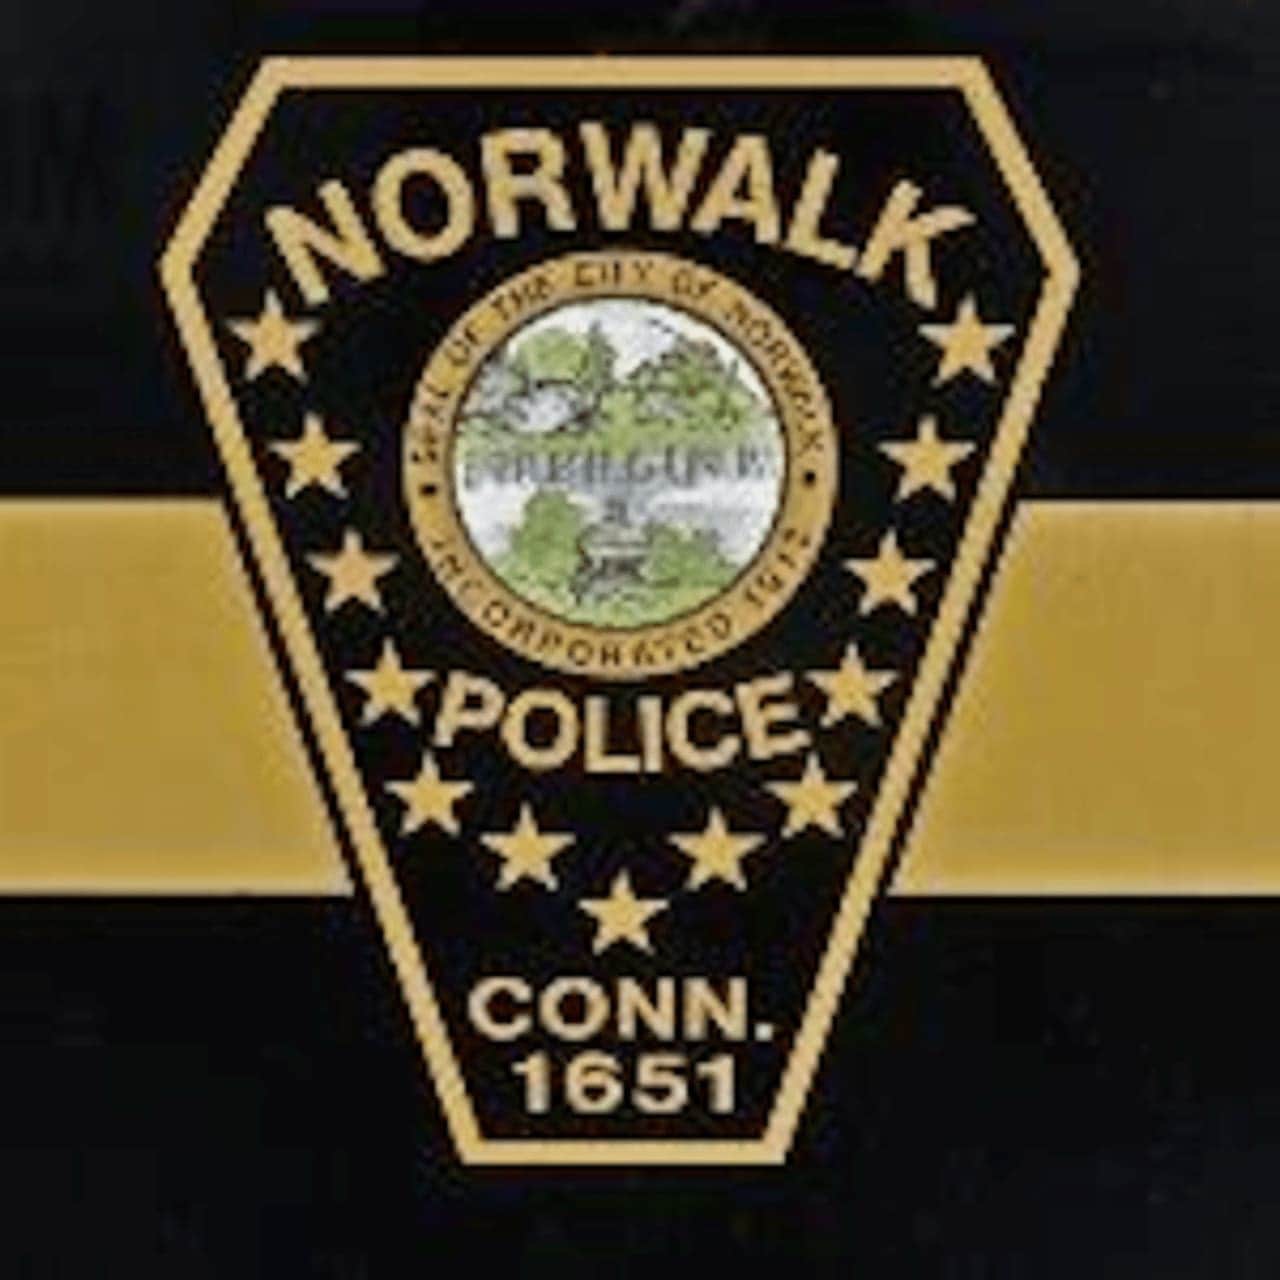 Two juveniles reported that a man tried to lure them into his car in Norwalk, according to the Hour.